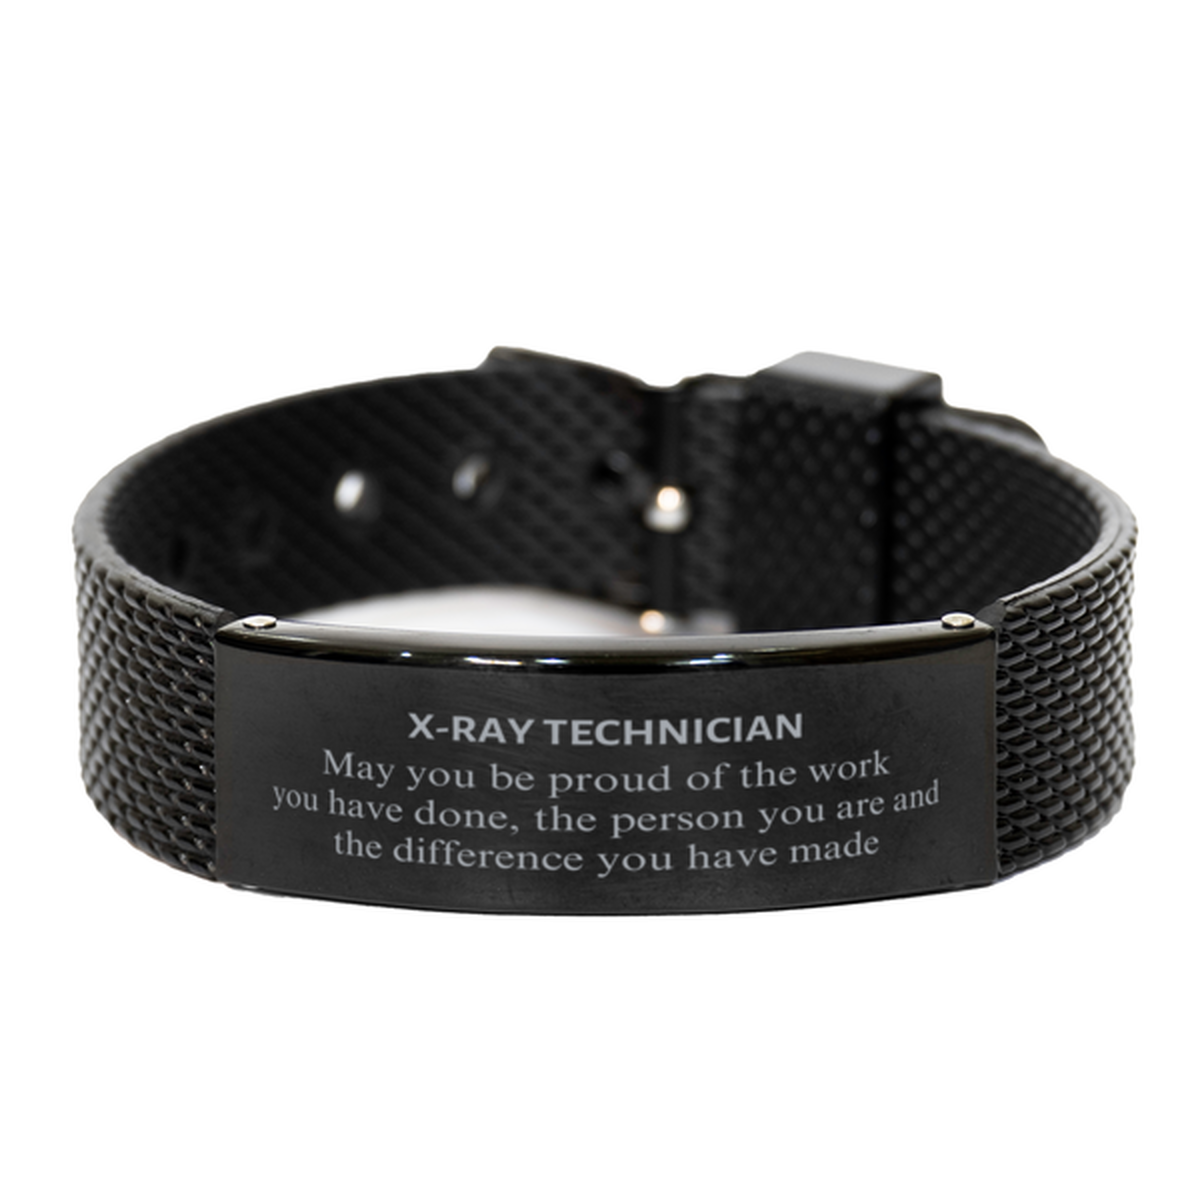 X-Ray Technician May you be proud of the work you have done, Retirement X-Ray Technician Black Shark Mesh Bracelet for Colleague Appreciation Gifts Amazing for X-Ray Technician